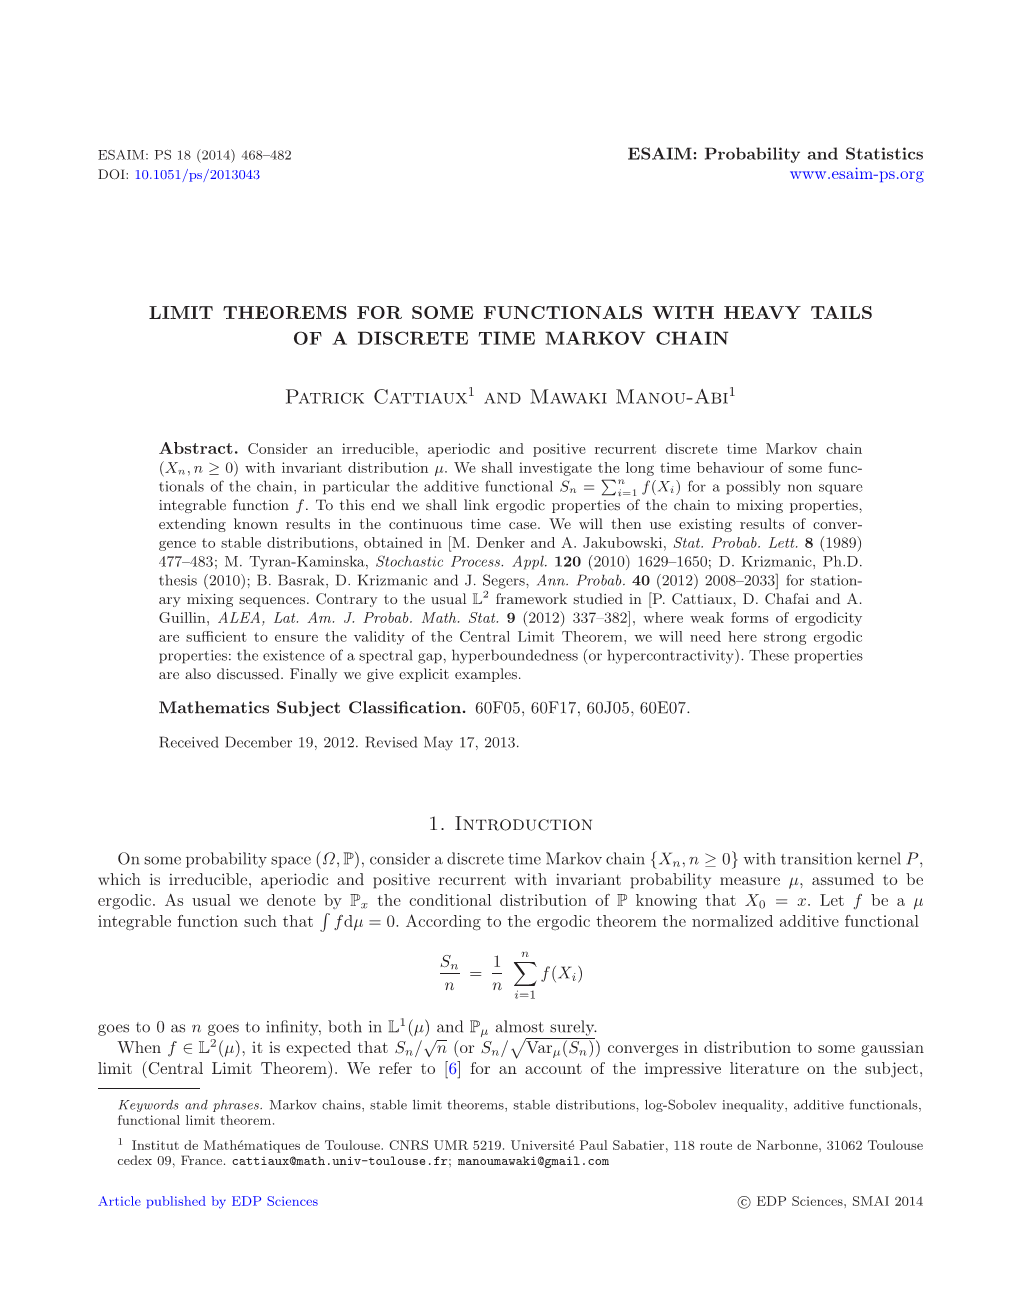 Limit Theorems for Some Functionals with Heavy Tails of a Discrete Time Markov Chain